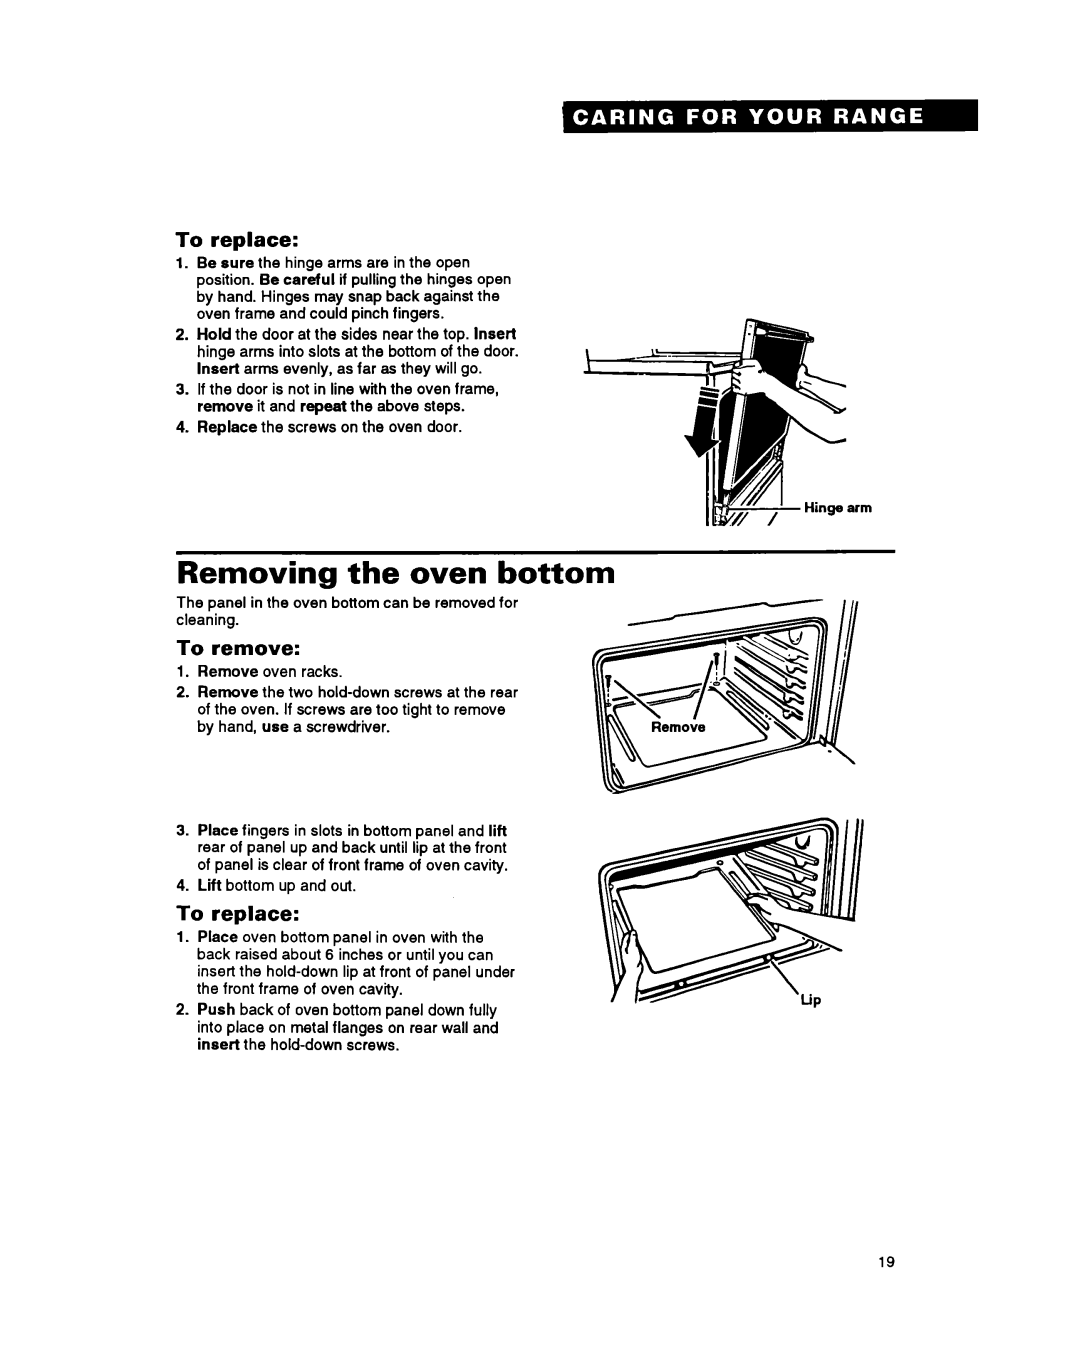 Whirlpool FGC355Y, FGP355Y, FGP345Y, FGP335Y important safety instructions Removing the oven bottom, To replace, To remove 